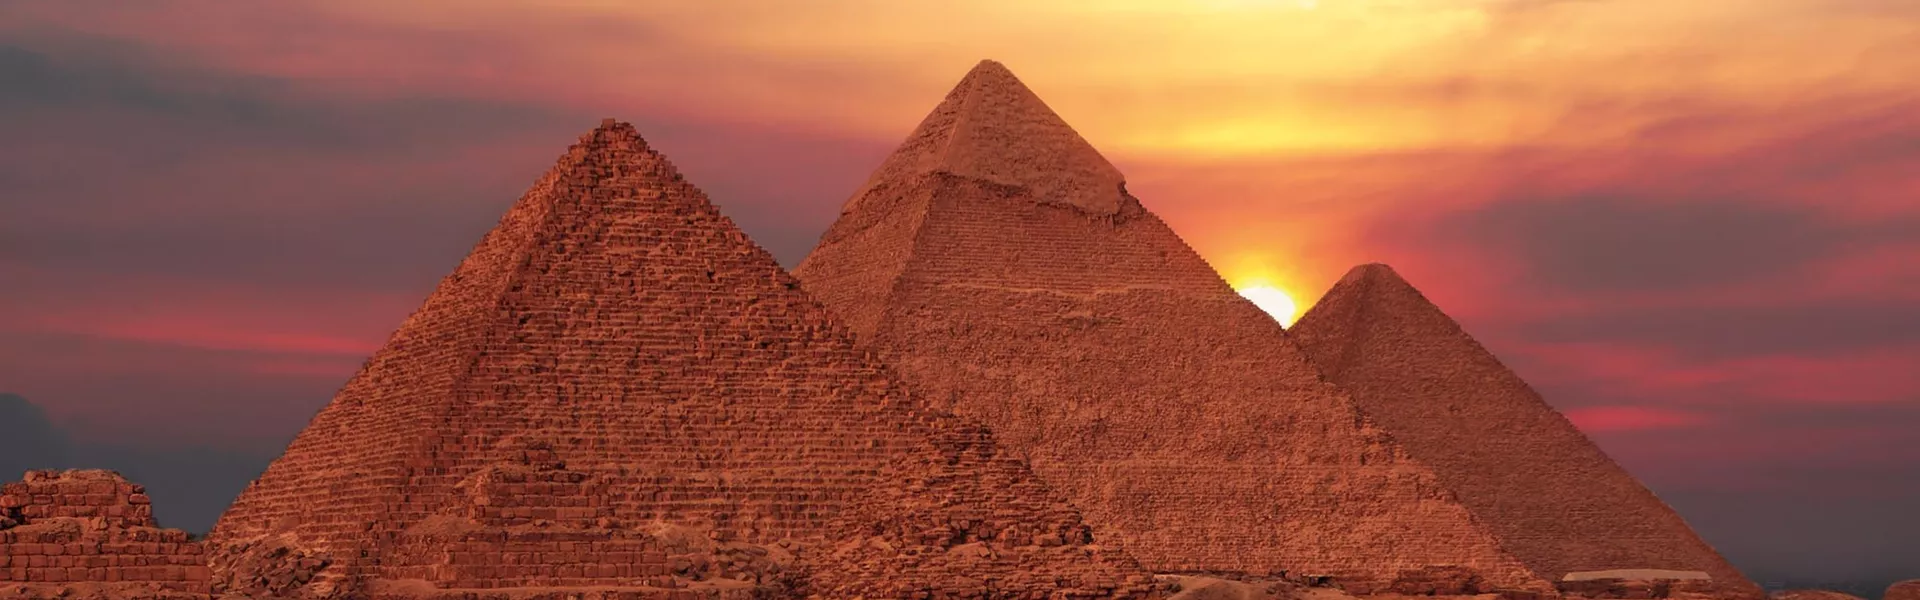 Pyramids of Giza In Egypt by sunset